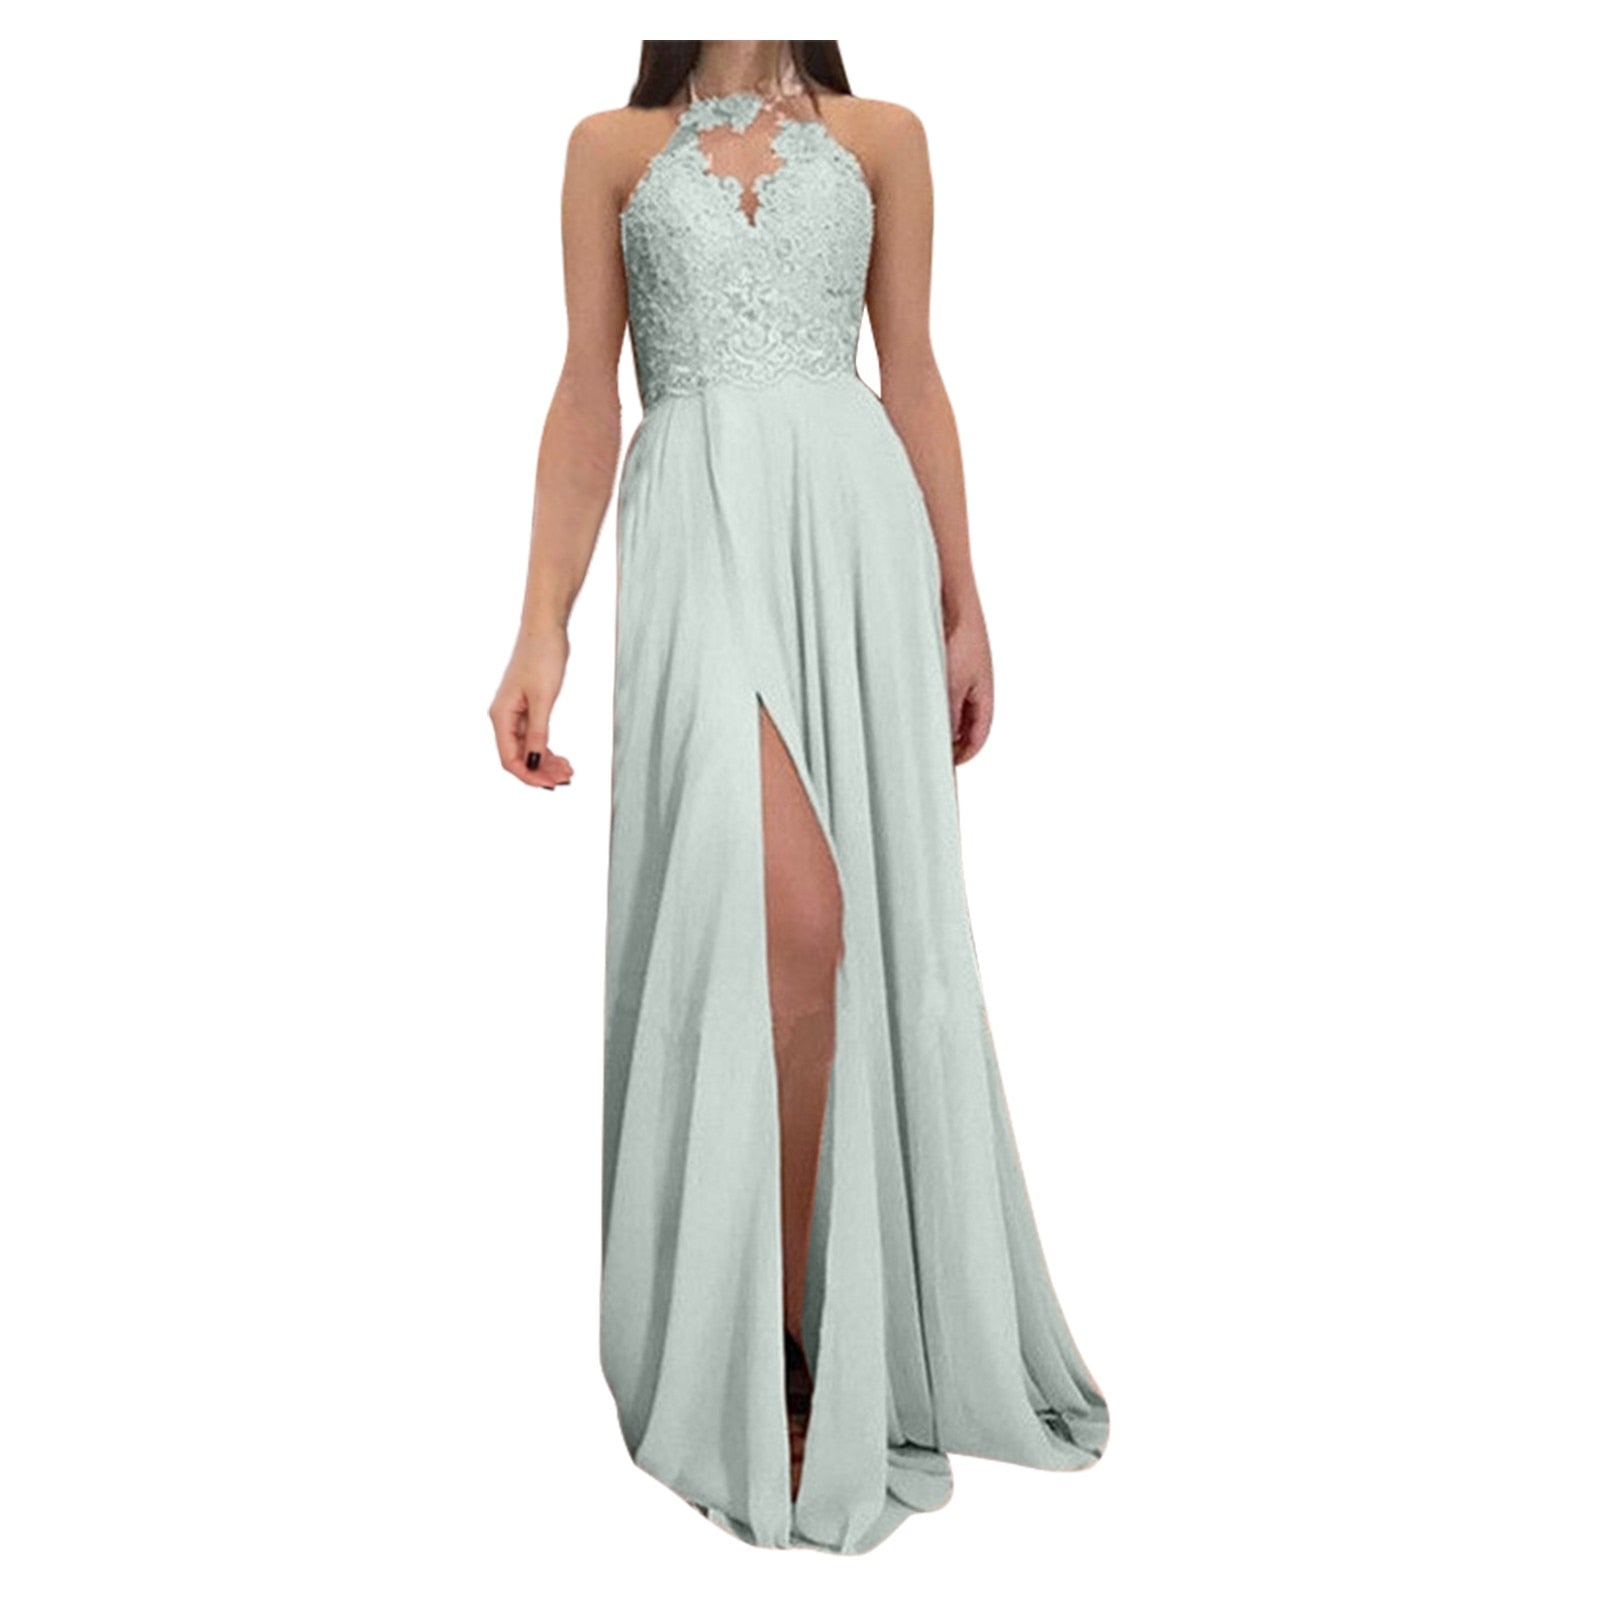 HOOR Elegant Sexy Lace Gown Mint Green